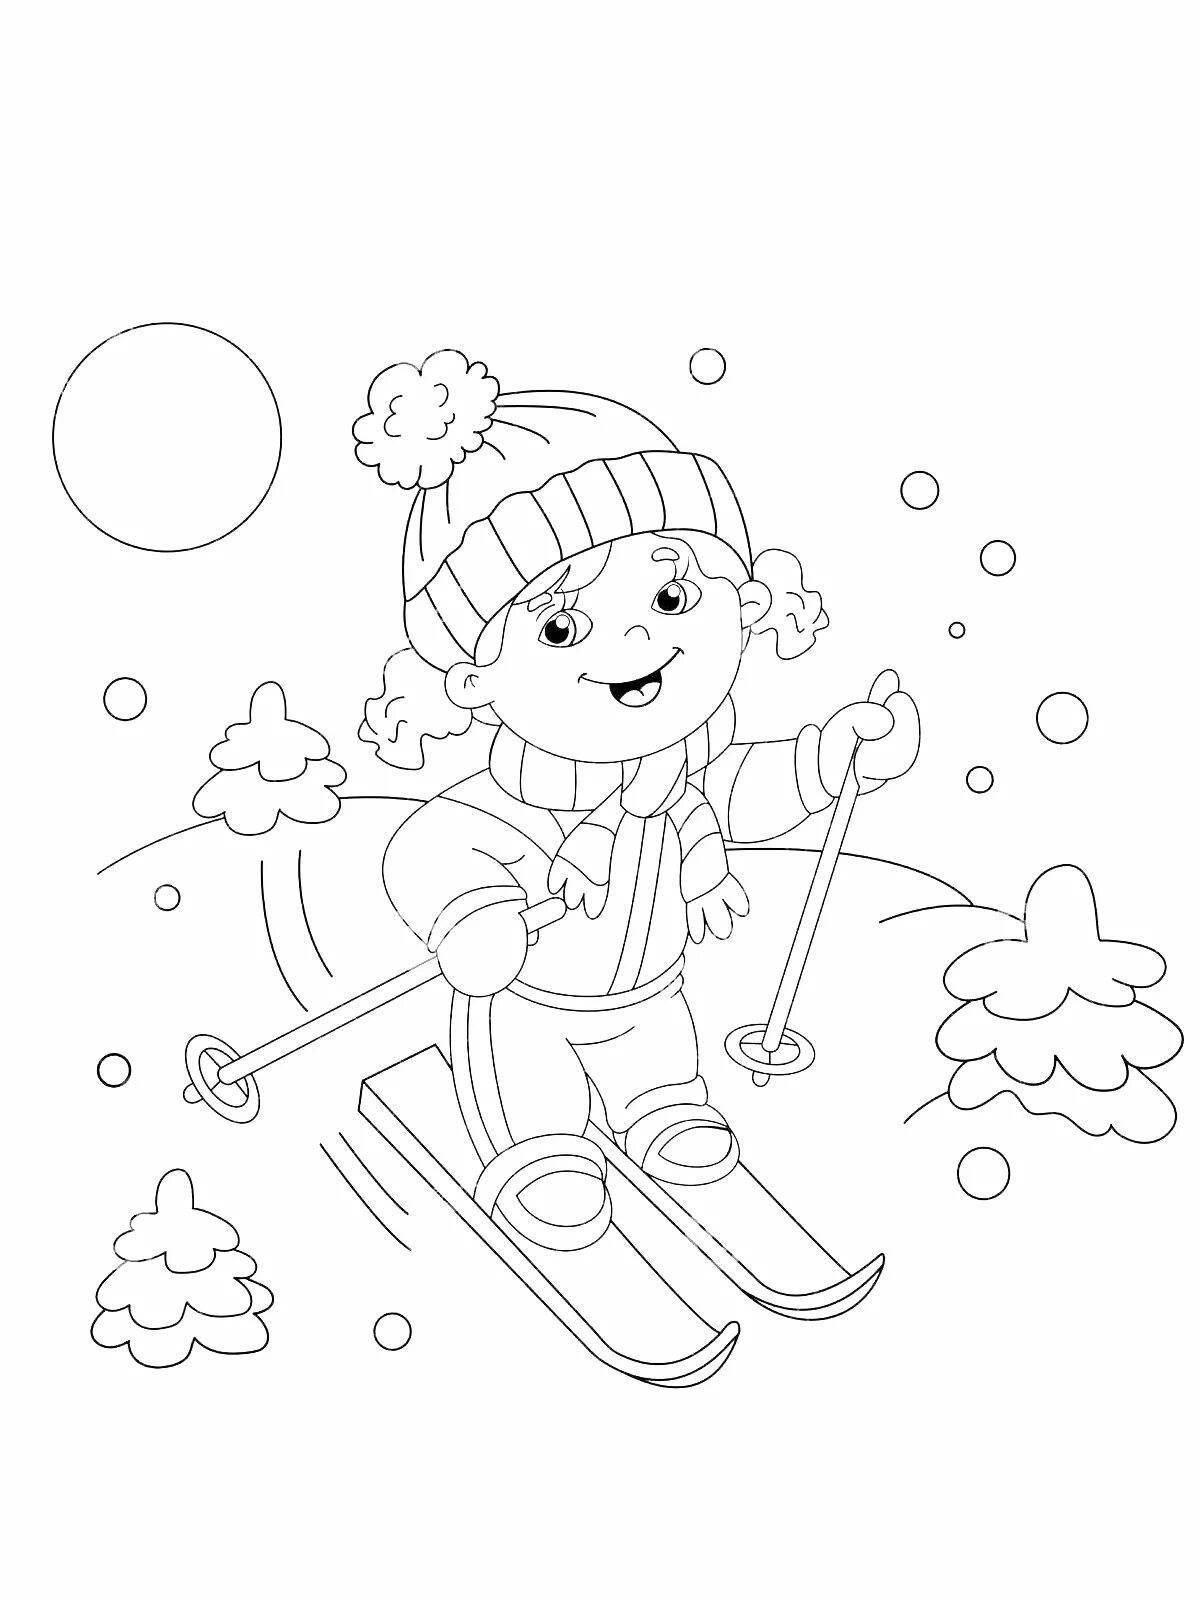 Spicy skier coloring book for 5-6 year olds